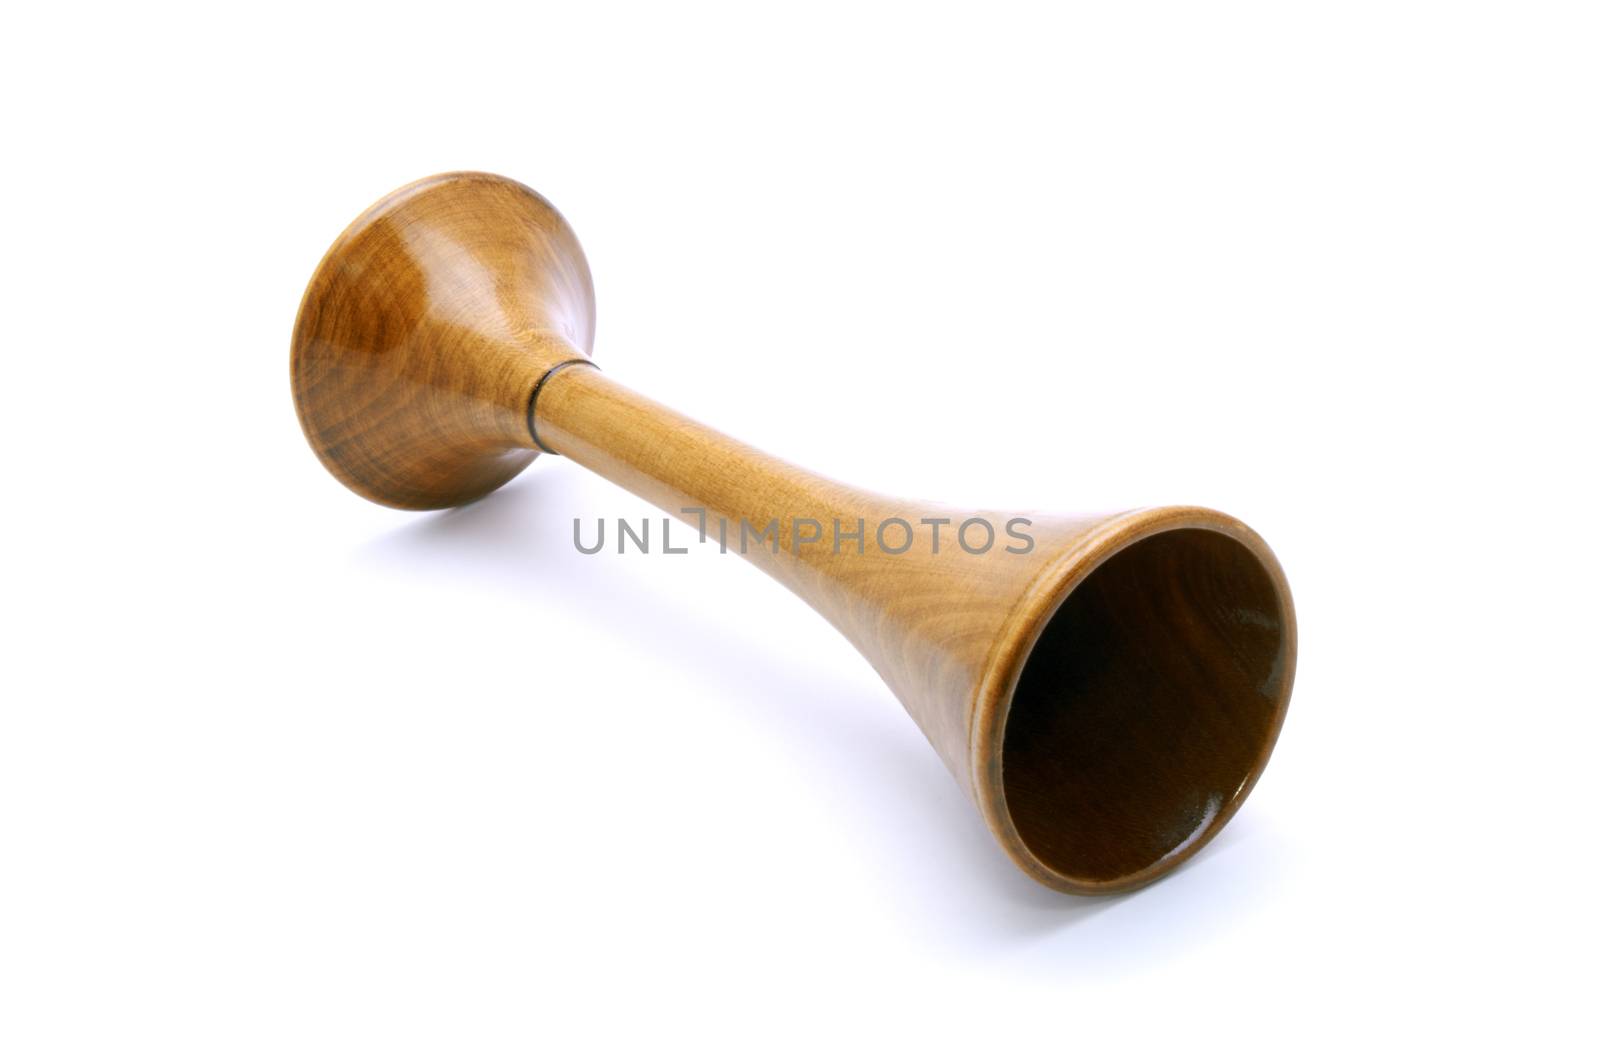 Wooden stethoscope isolated on a white background